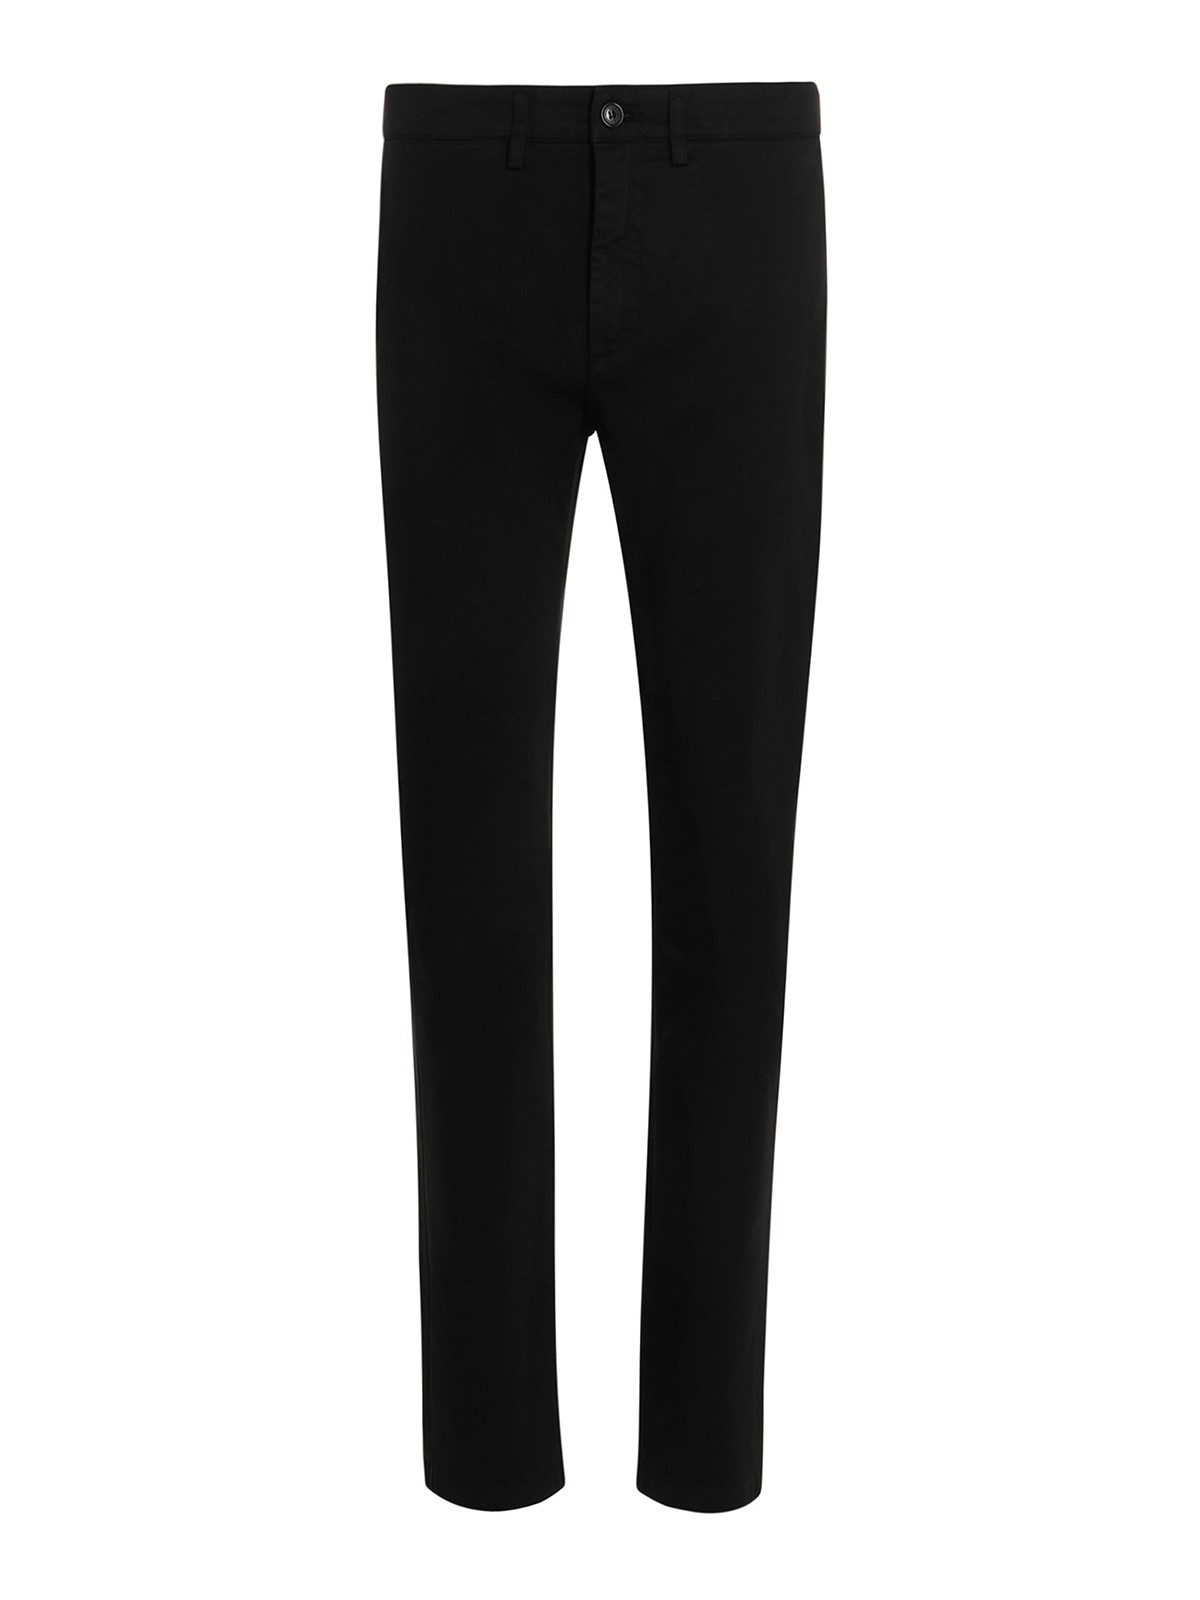 Department 5 Mike Cotton Chino-style Trousers In Black